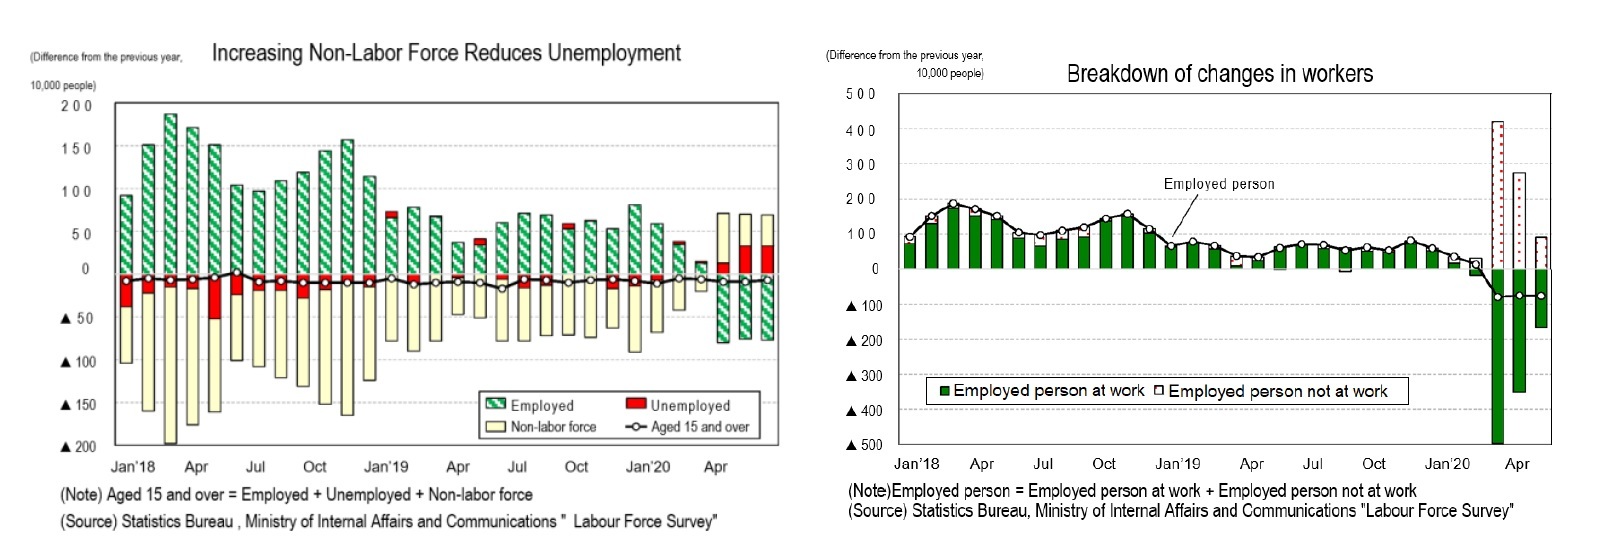 Increasing Non-Lobor Force Reduces Unemployment/Breakdown of changes in workers